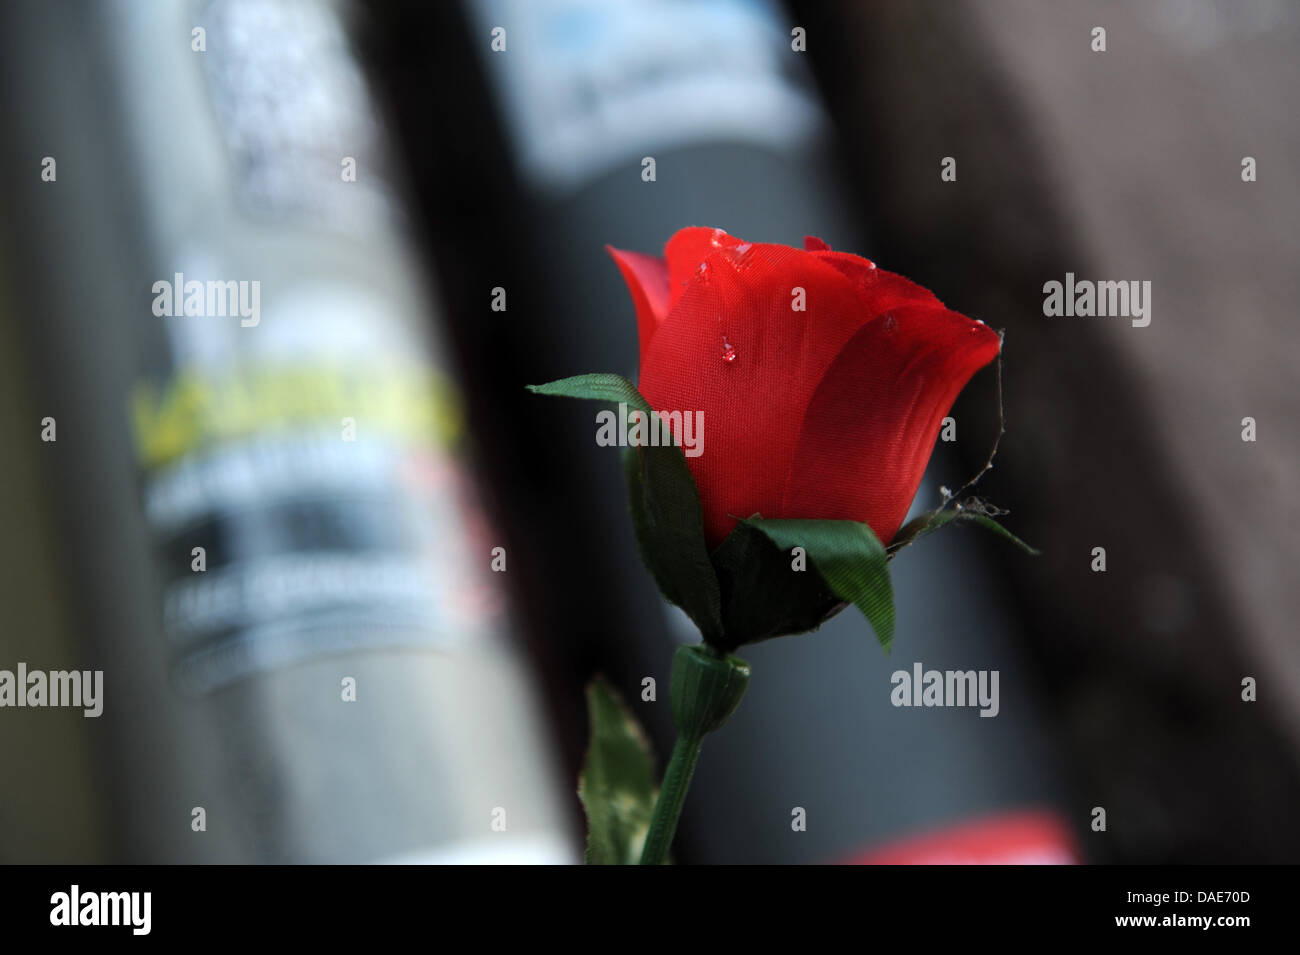 Mordserie High Resolution Stock Photography and Images - Alamy